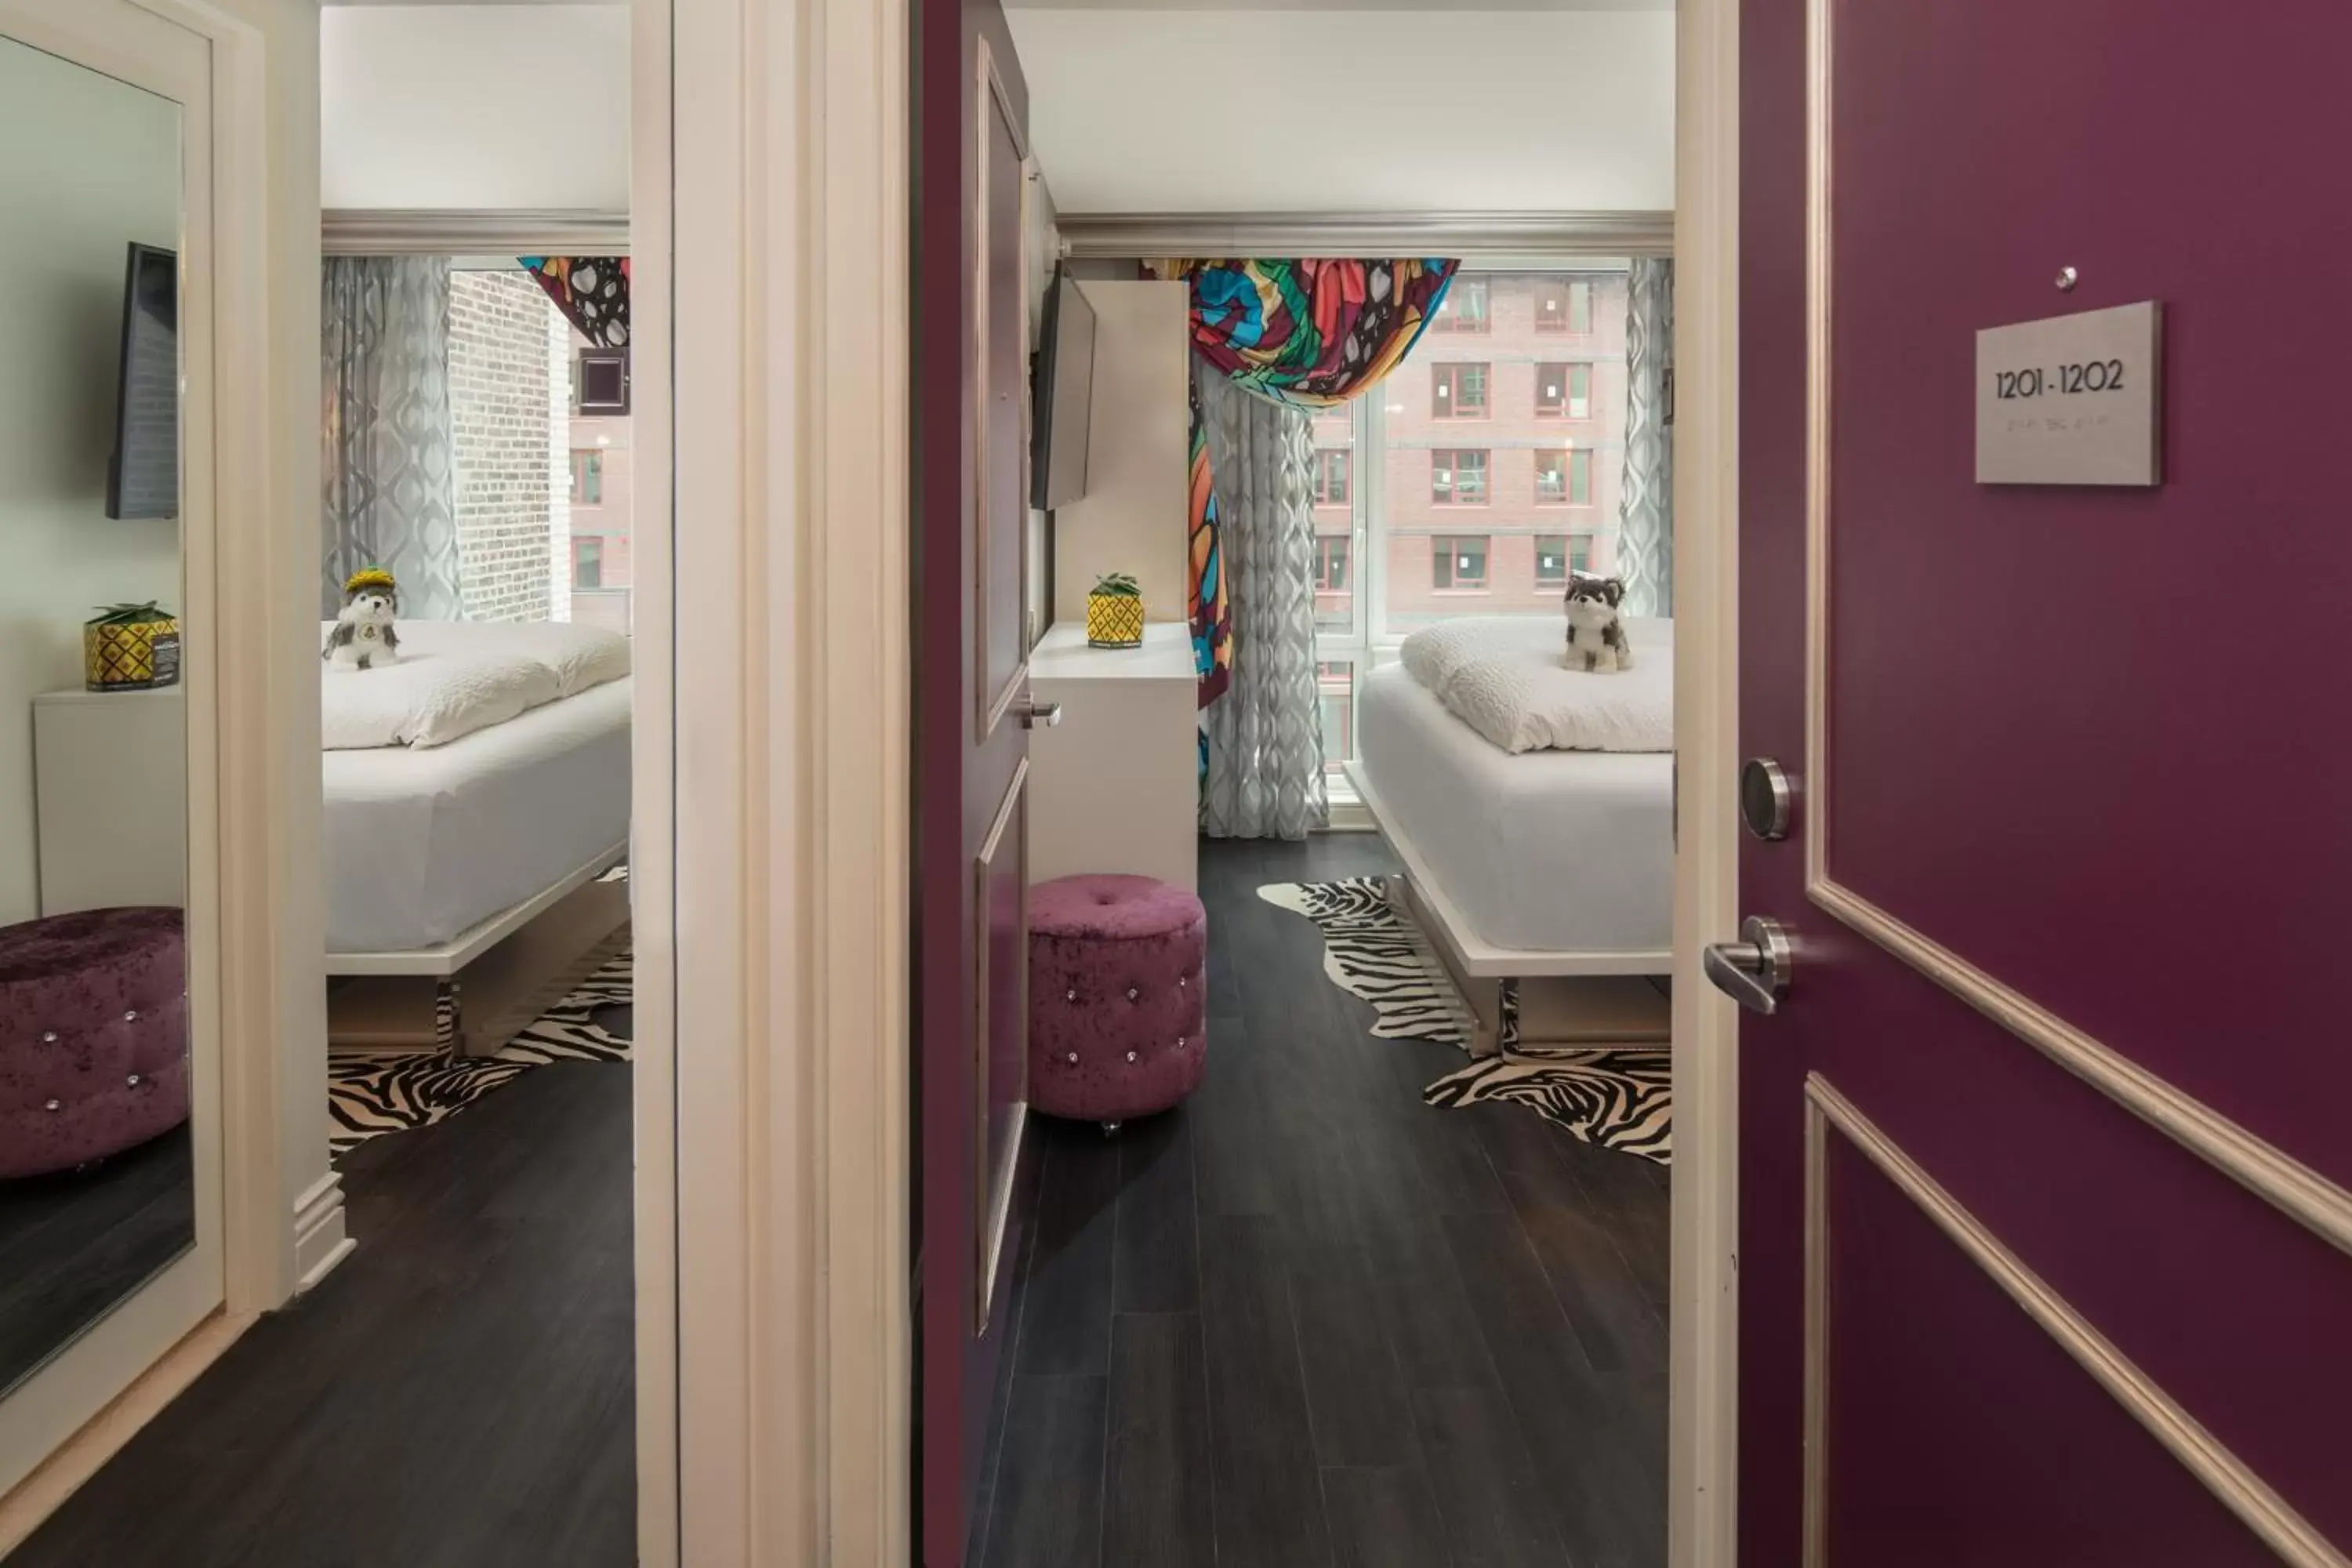 Area and facilities in Staypineapple, An Artful Hotel, Midtown New York